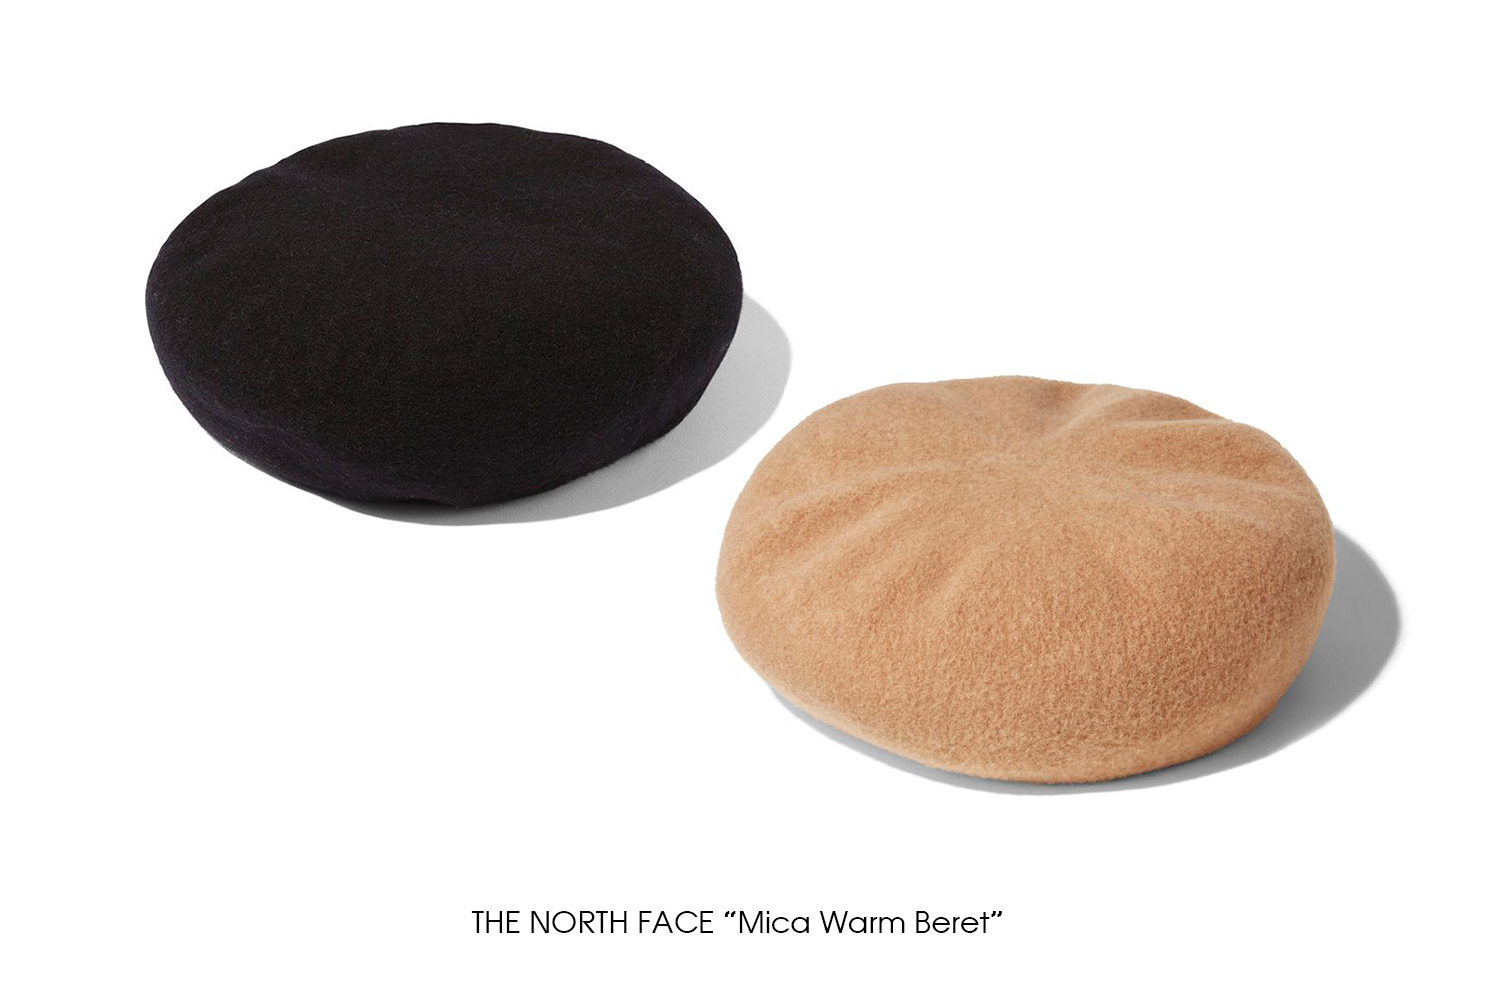 THE NORTH FACE "Mica Warm Beret"